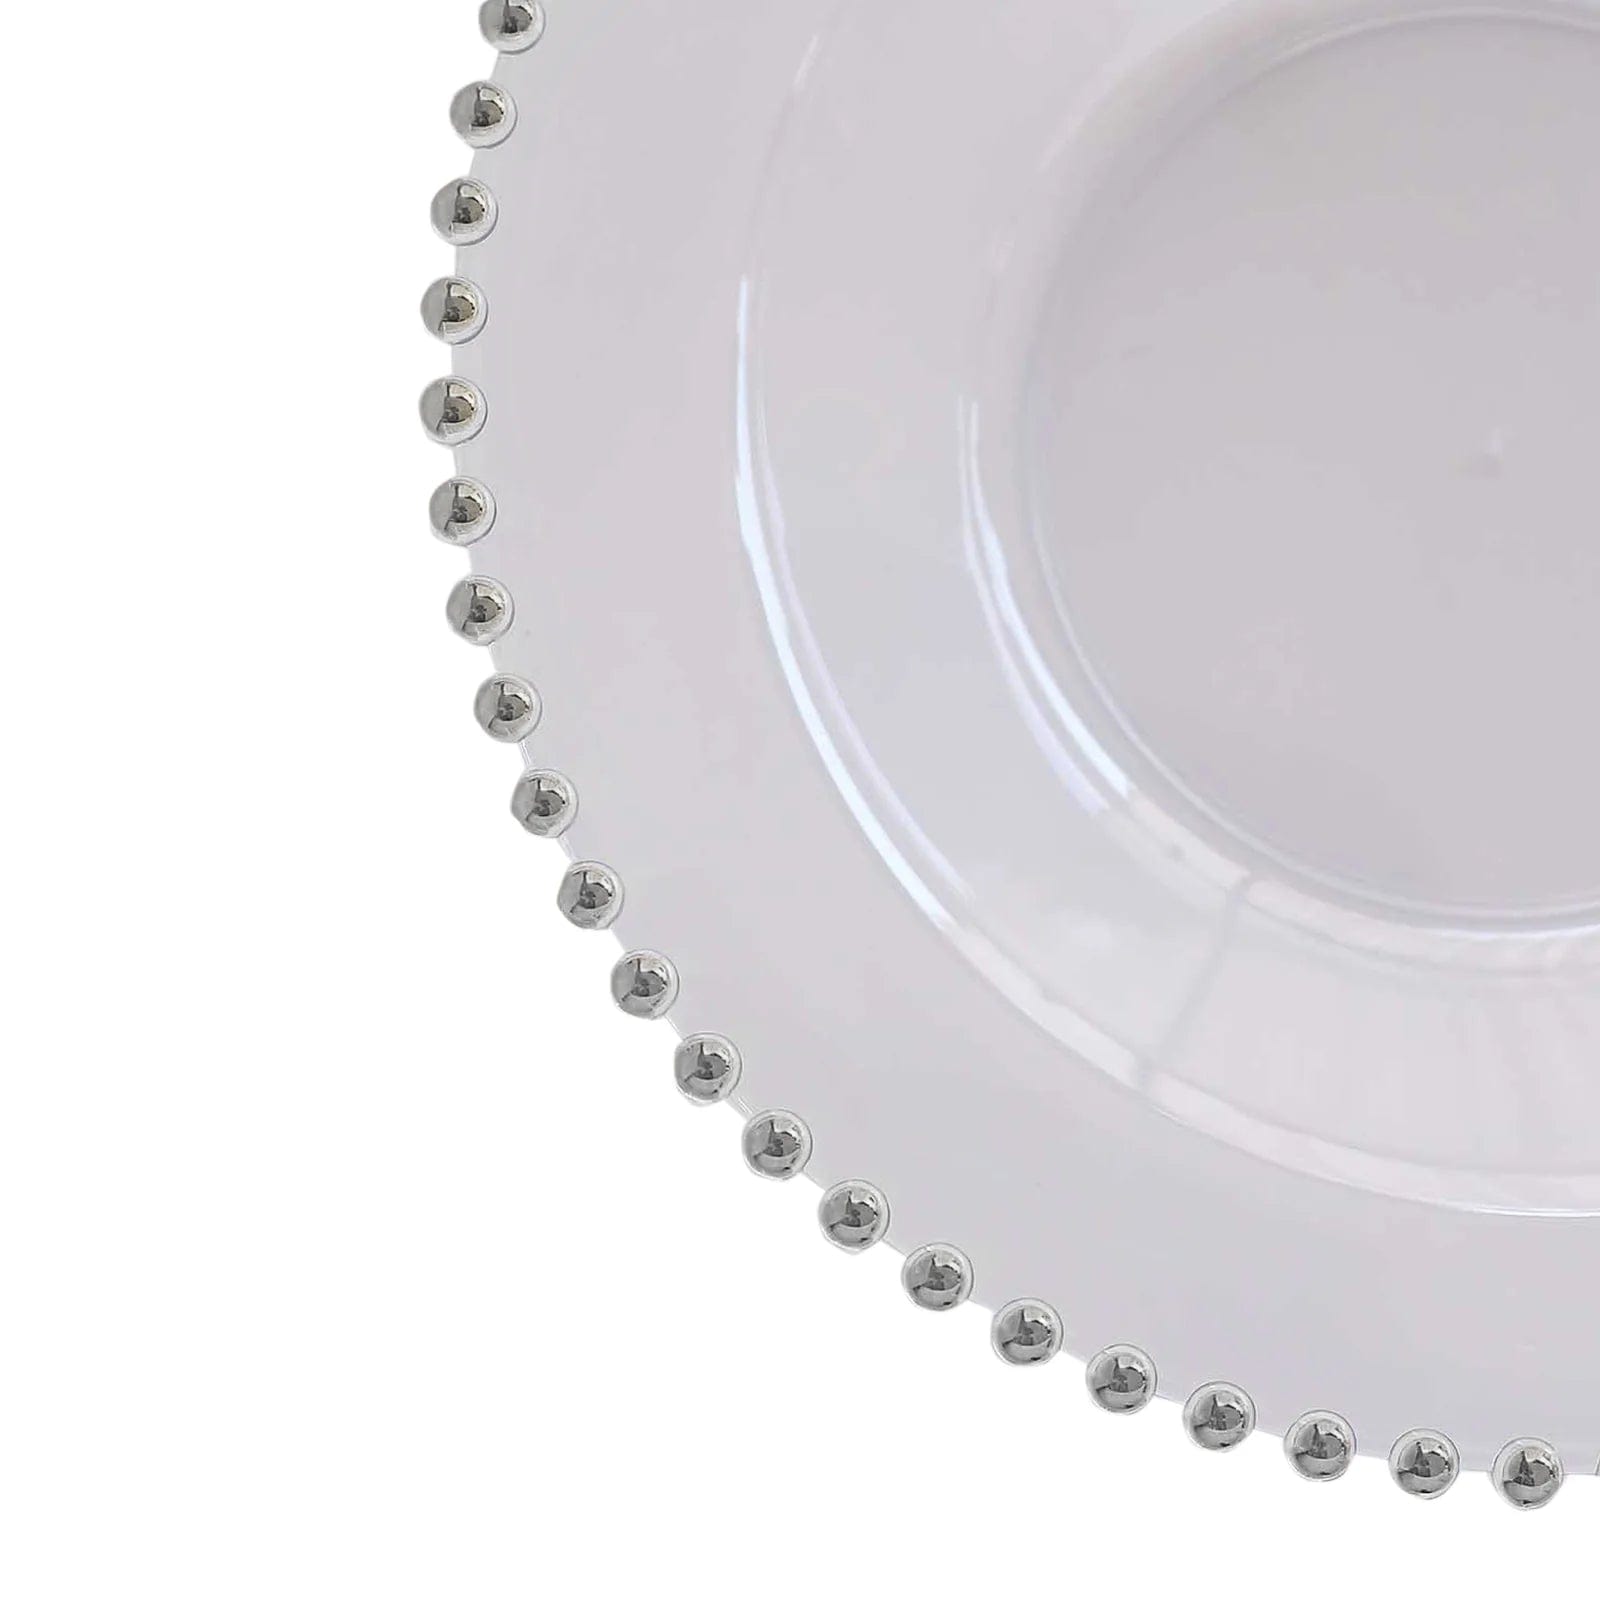 10 Plastic Soup Bowls with Beaded Rim